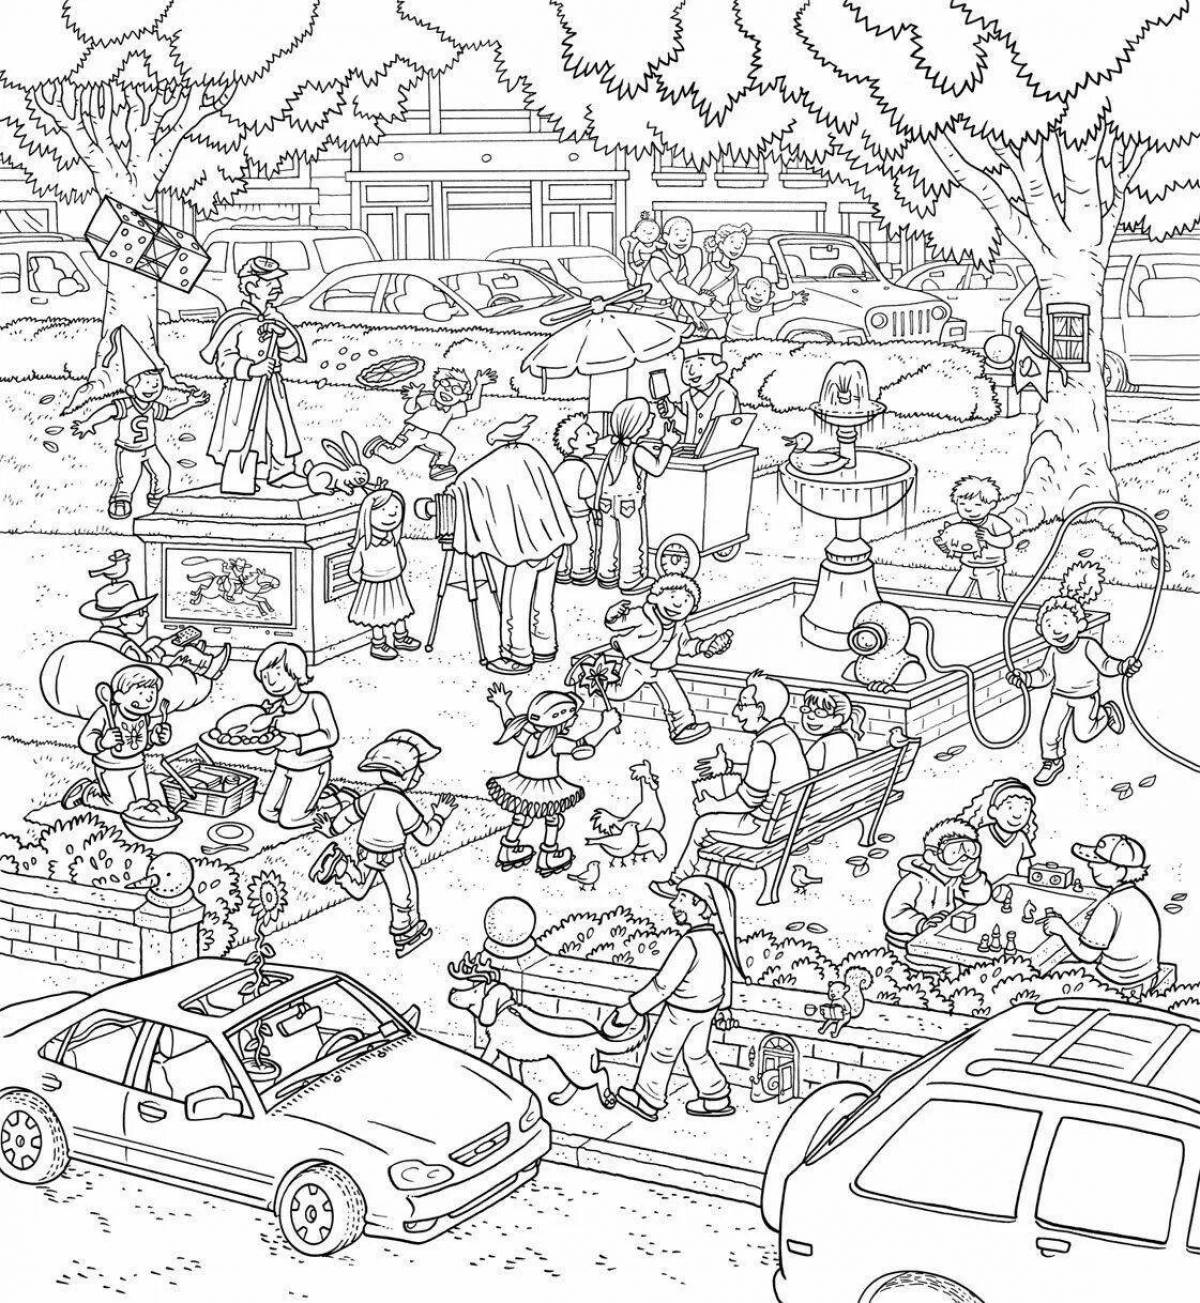 Impressive coloring page with many details